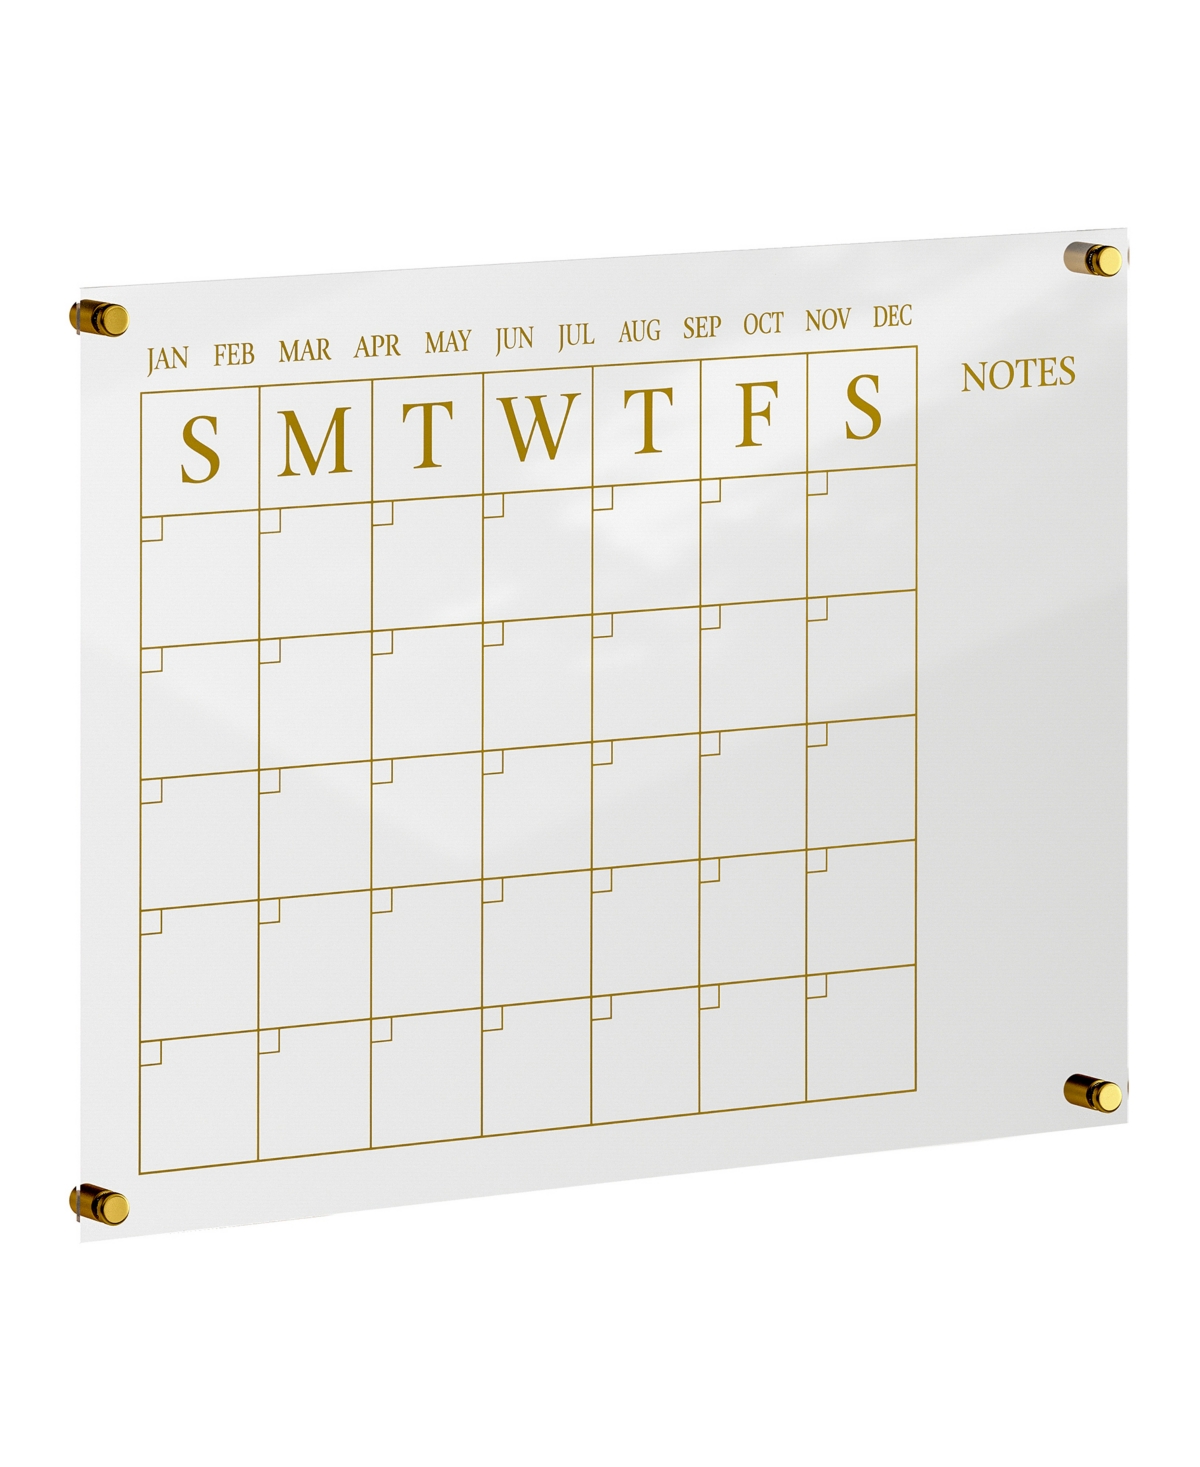 Martha Stewart Grayson Acrylic Wall Calendar With Notes With Dry Erase Marker And Mounting Hardware, 24" X 18" In Clear,gold